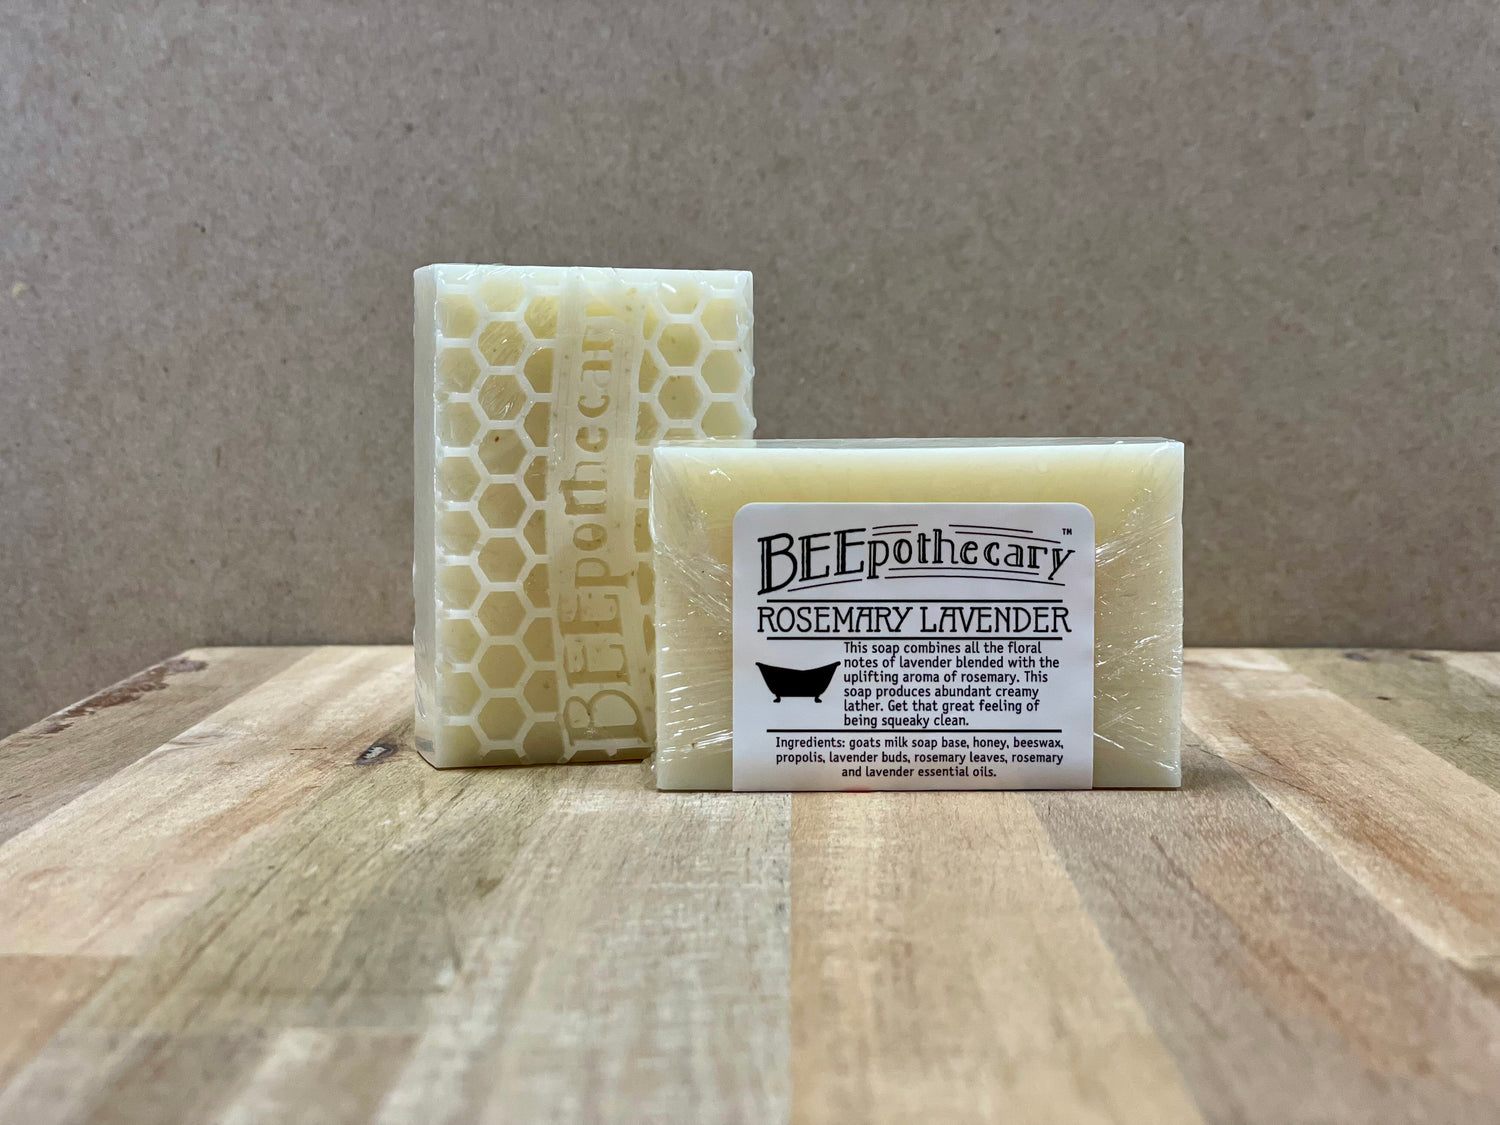 BEEpothecary Goat Milk Soap Rosemary Lavender fragrance in packaging with white label